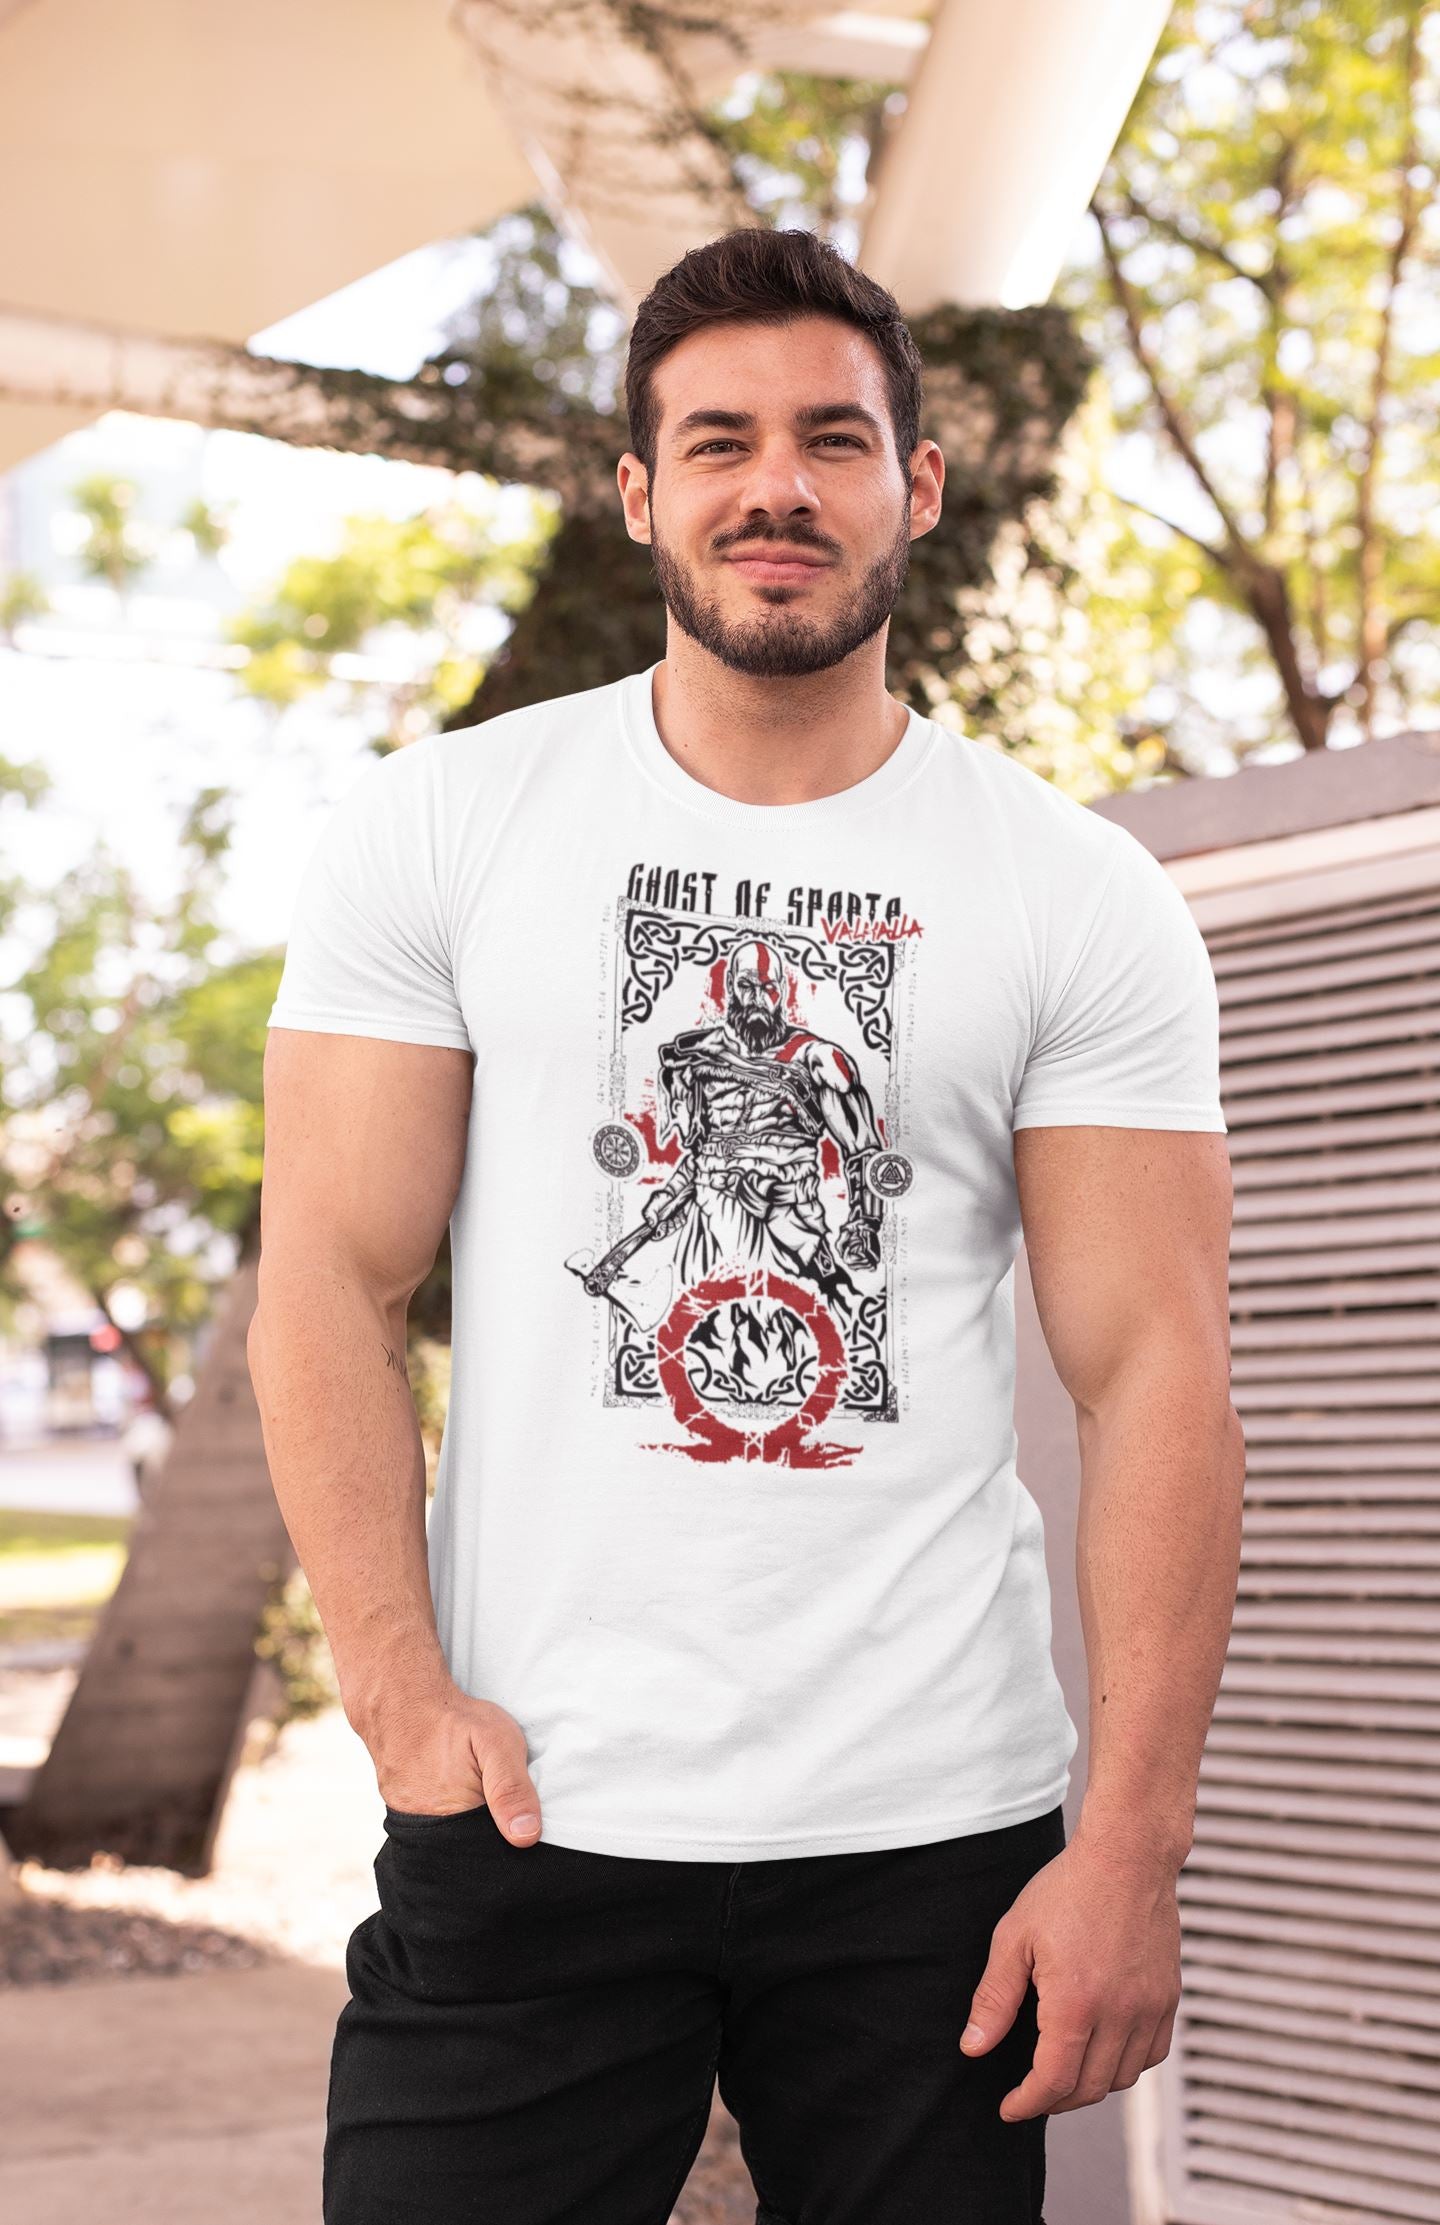 Kratos The Ghost of Sparta / Valhalla Official God of War T Shirt for Men and Women freeshipping - Catch My Drift India